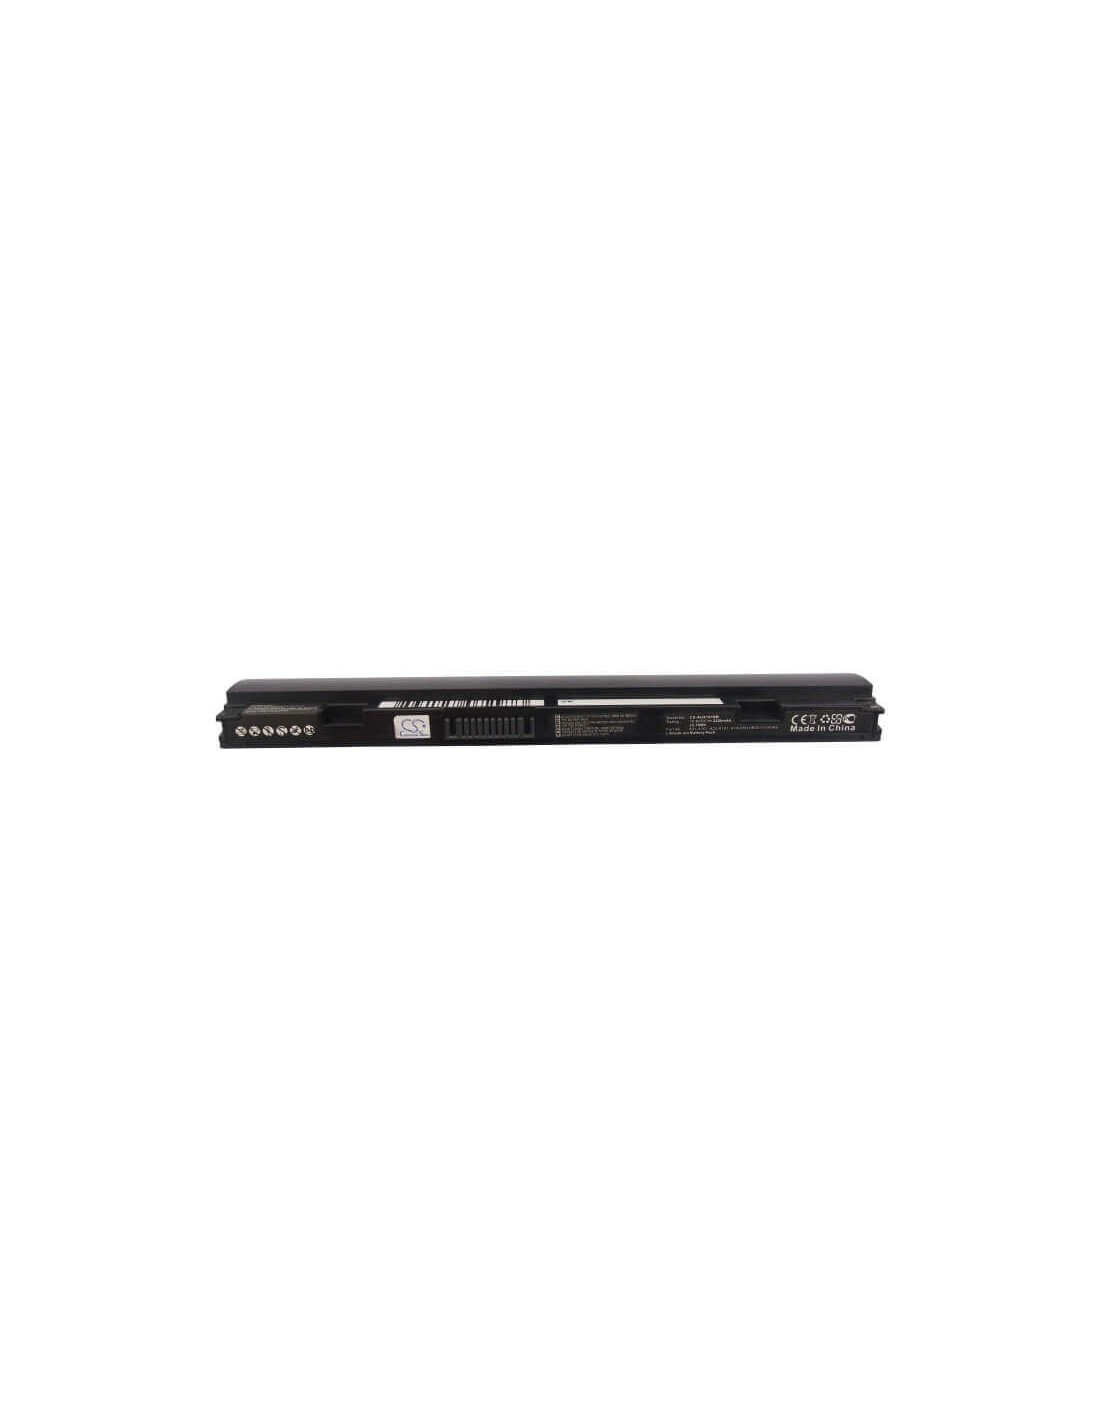 Black Battery for Asus Eee Pc X101, Eee Pc X101c, Eee Pc X101ch 10.8V, 2200mAh - 23.76Wh